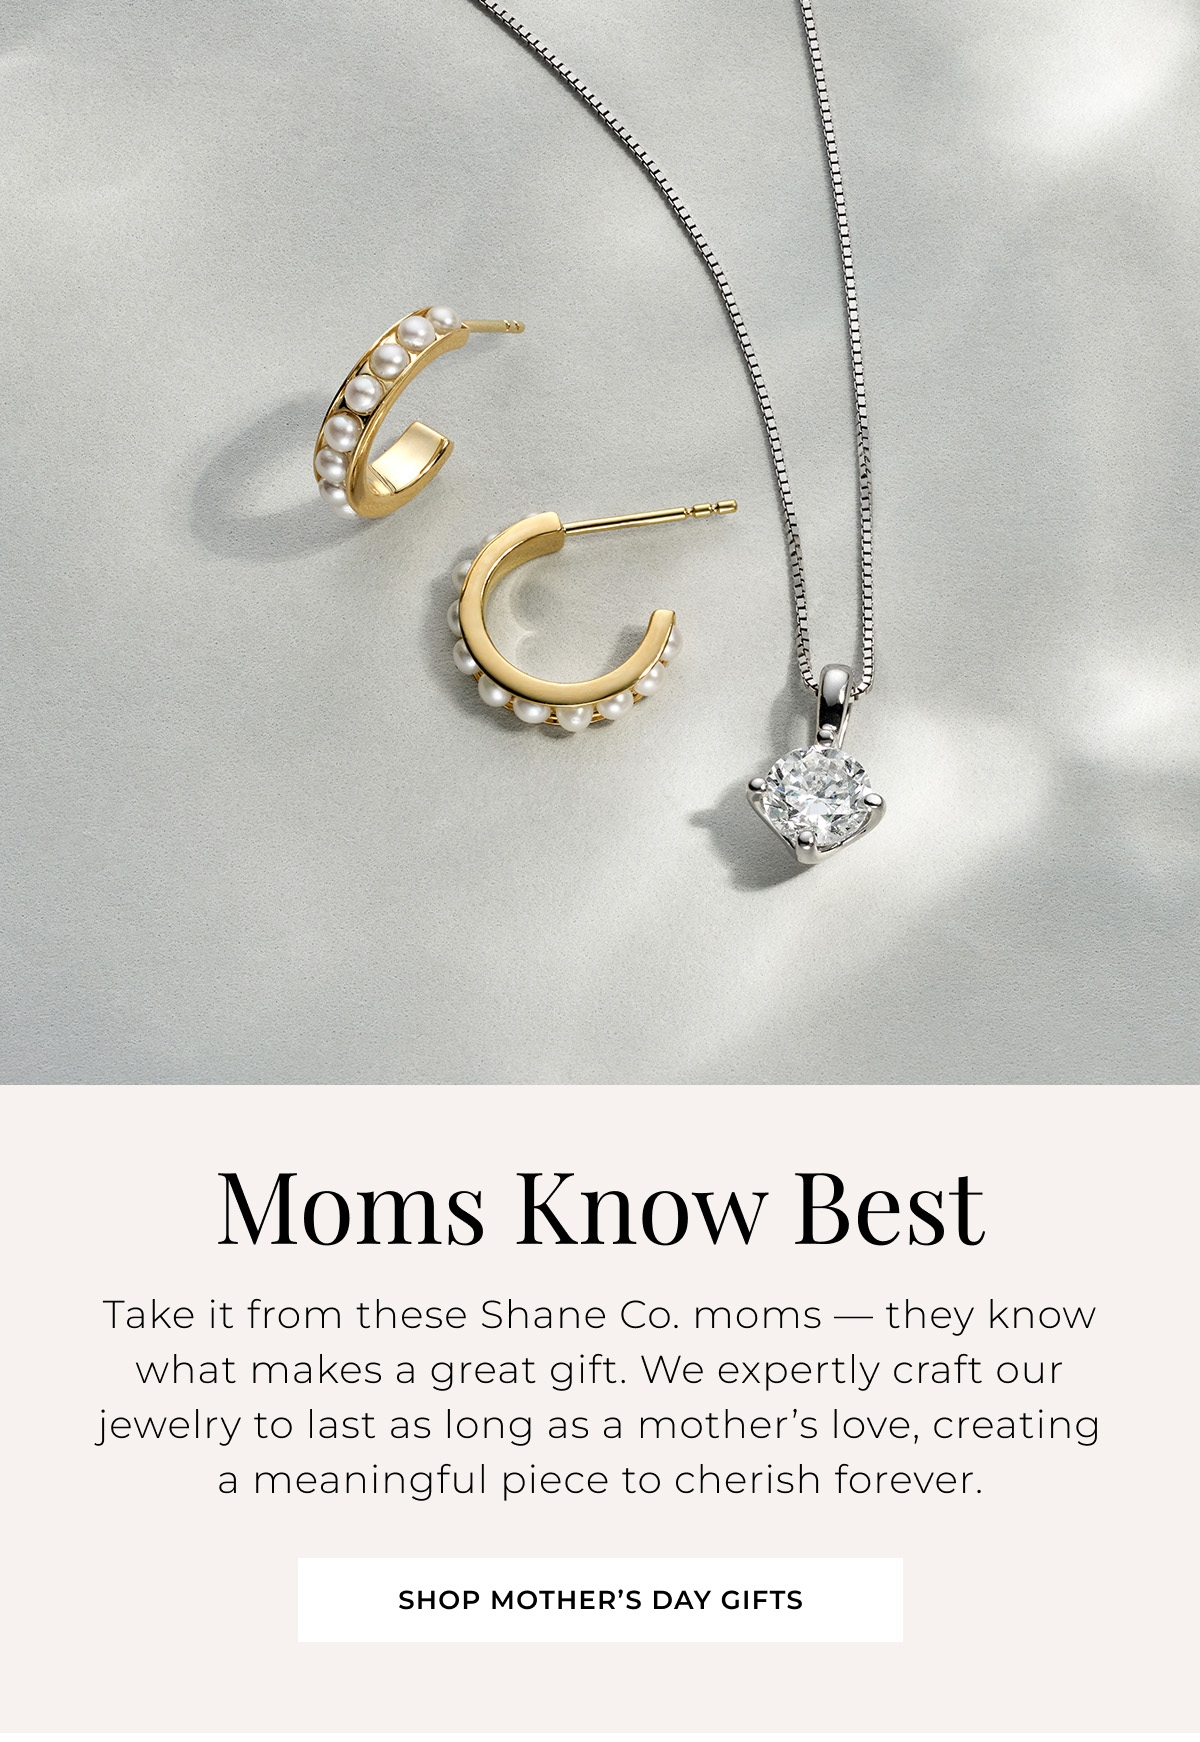 Moms Know Best - Take it from these Shane Co. moms  they know what makes a great gift. We expertly craft our jewelry to last as long as a mothers love, creating a meaningful piece to cherish forever. Shop Mothers Day Gifts >